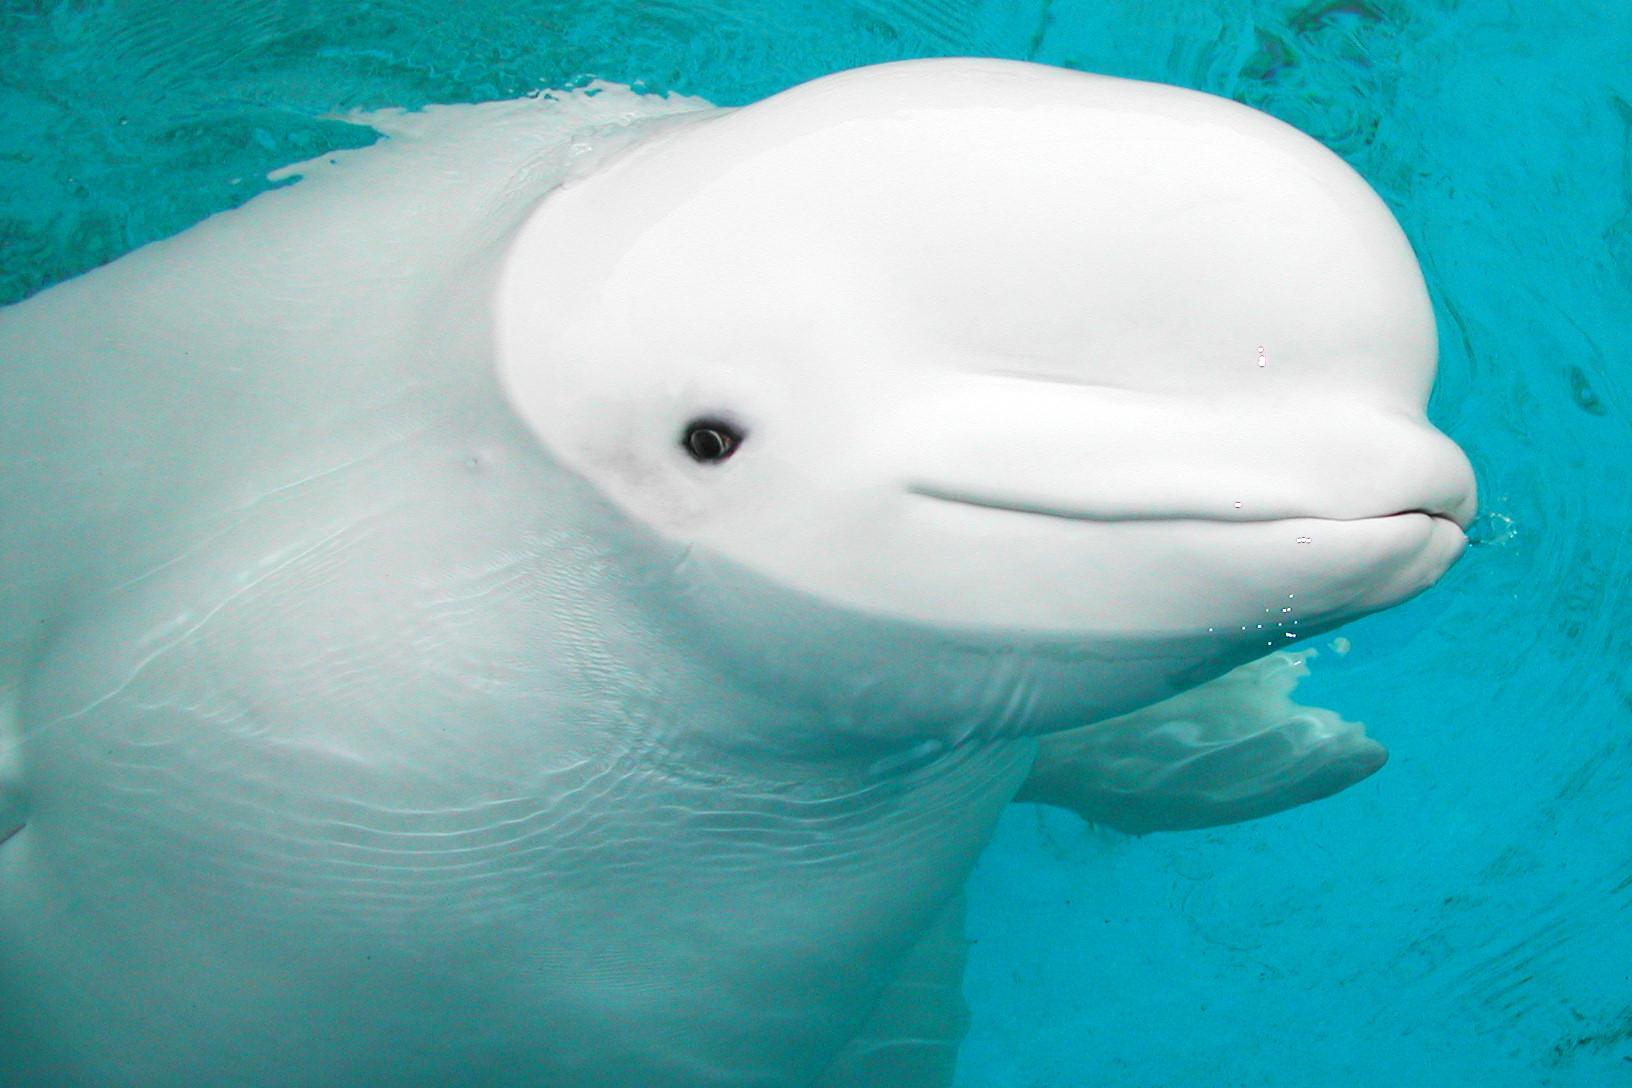 Beluga HD Wallpapers and Backgrounds